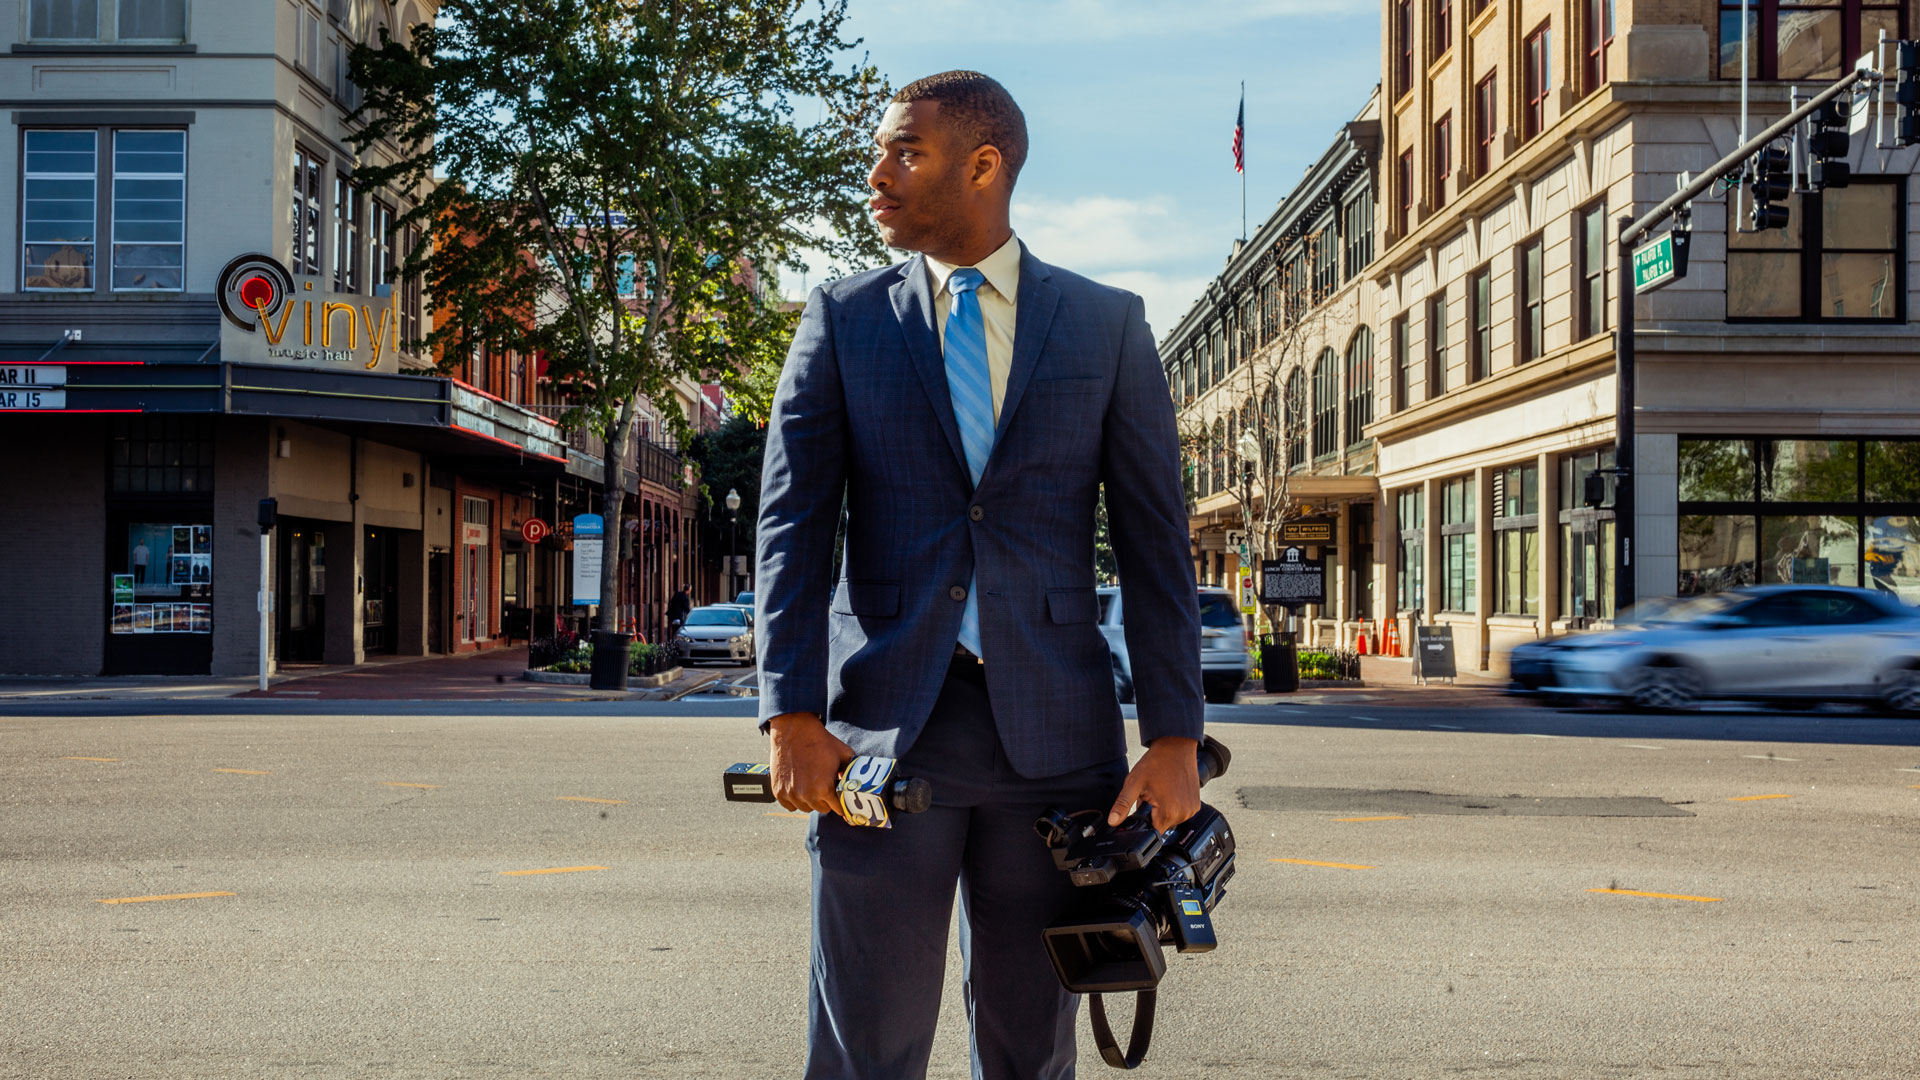 Bryant Clerkley stands in a street with his camera and microphone.